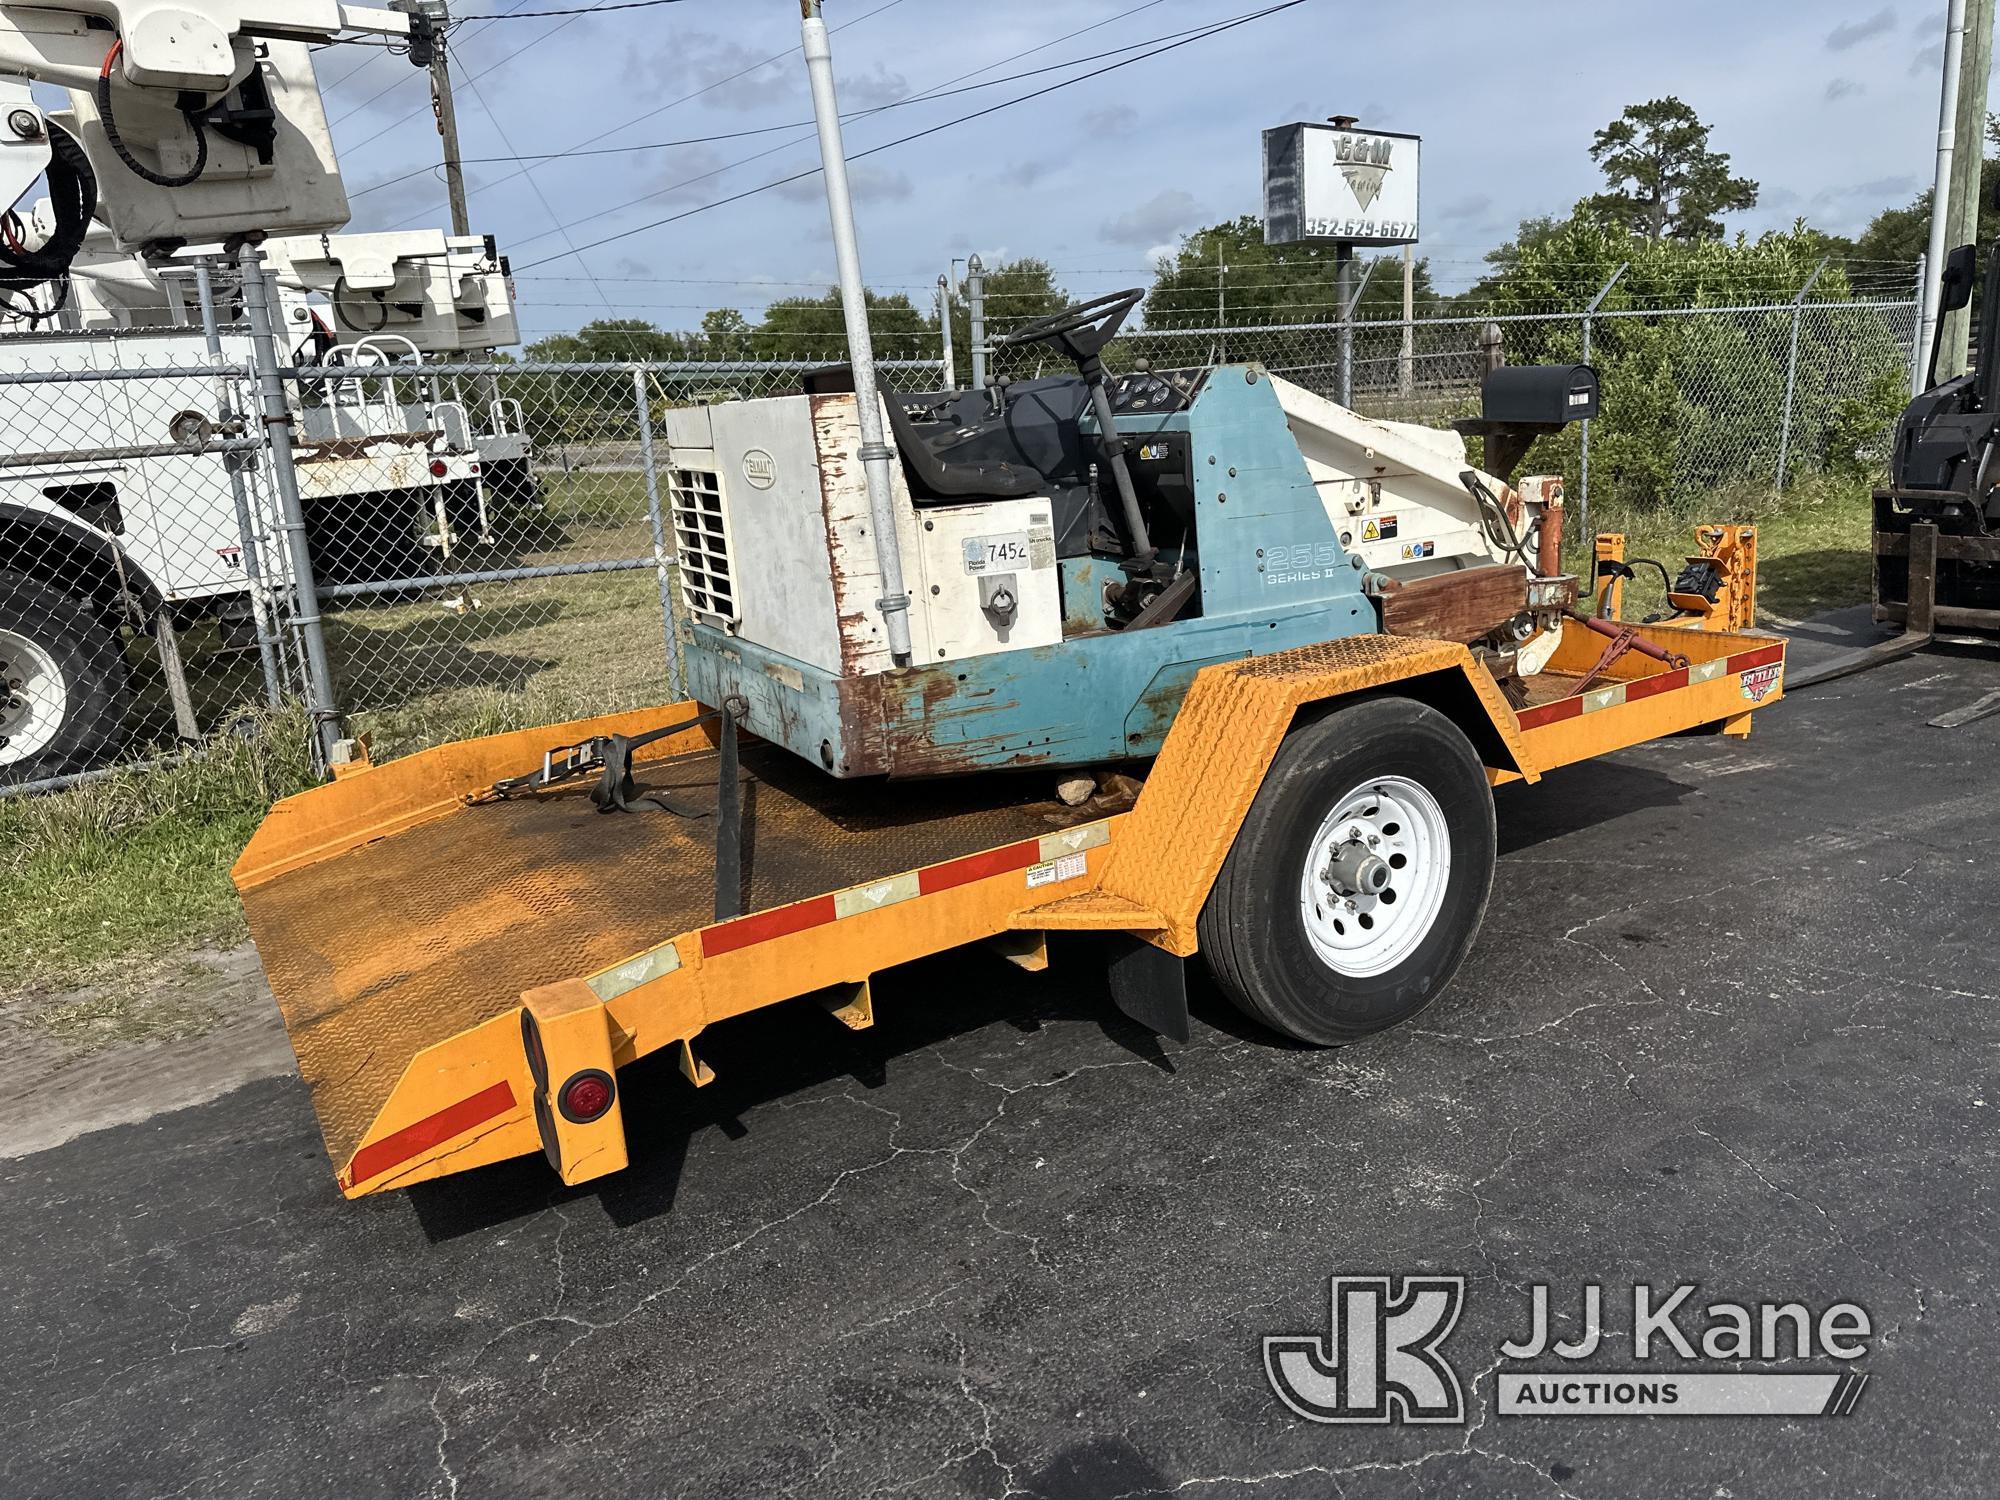 (Ocala, FL) 1990 Tennant 255 Series II Sweeper Duke Unit) (Not Running, Condition Unknown) (Selling